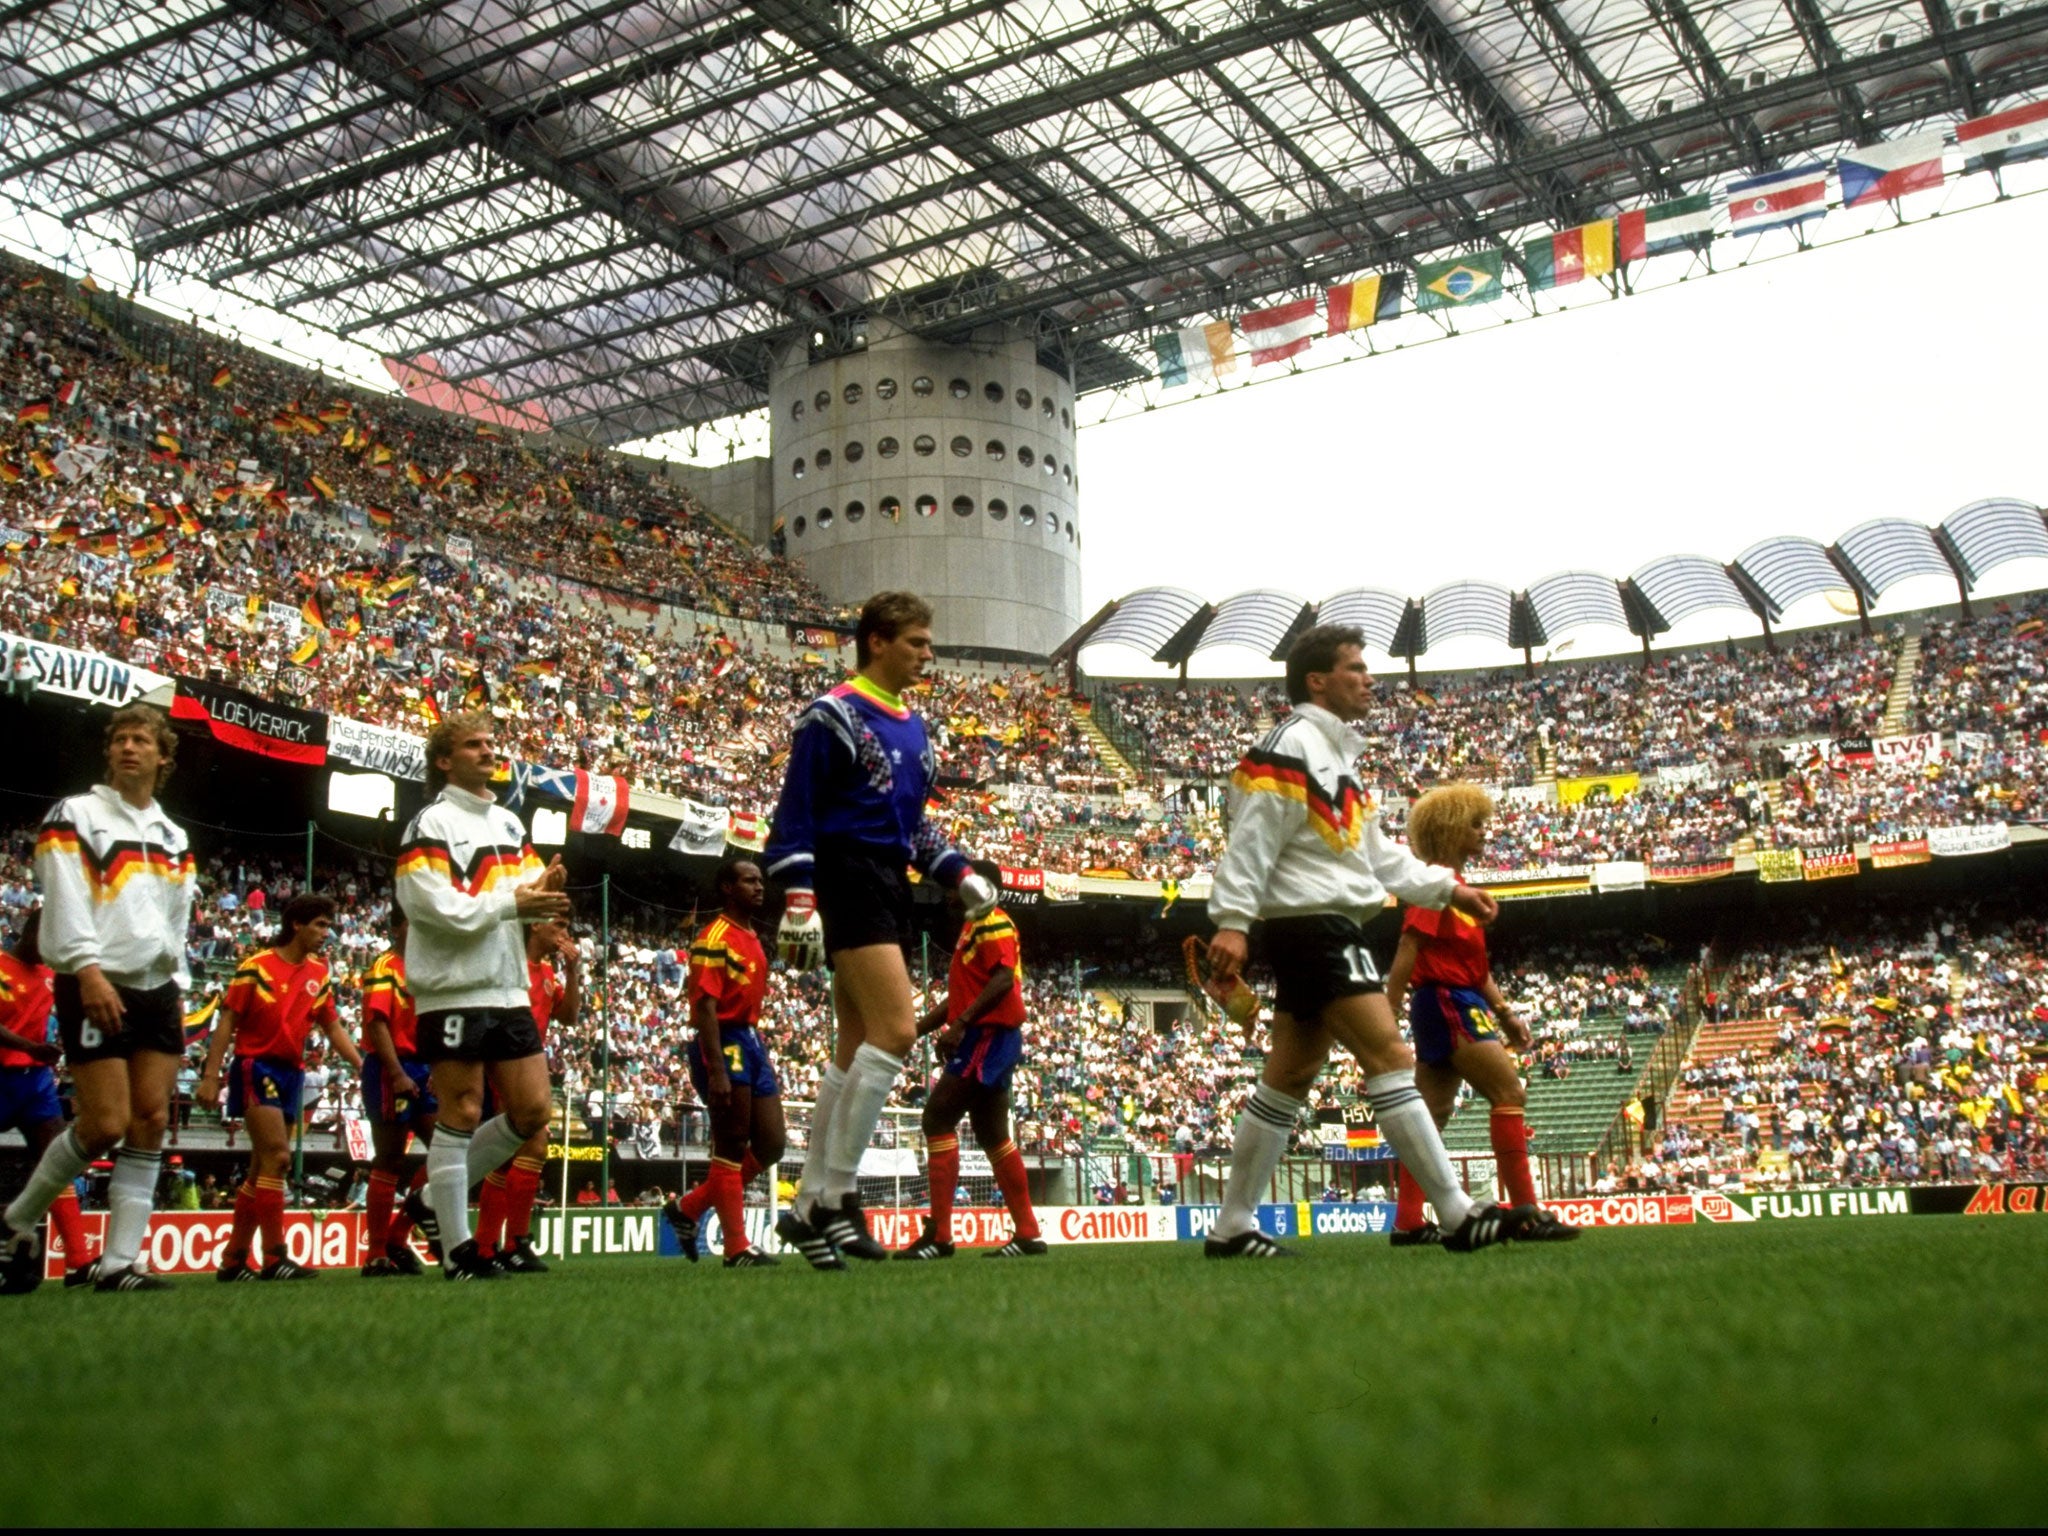 Italia 90 changed the landscape of the game forever